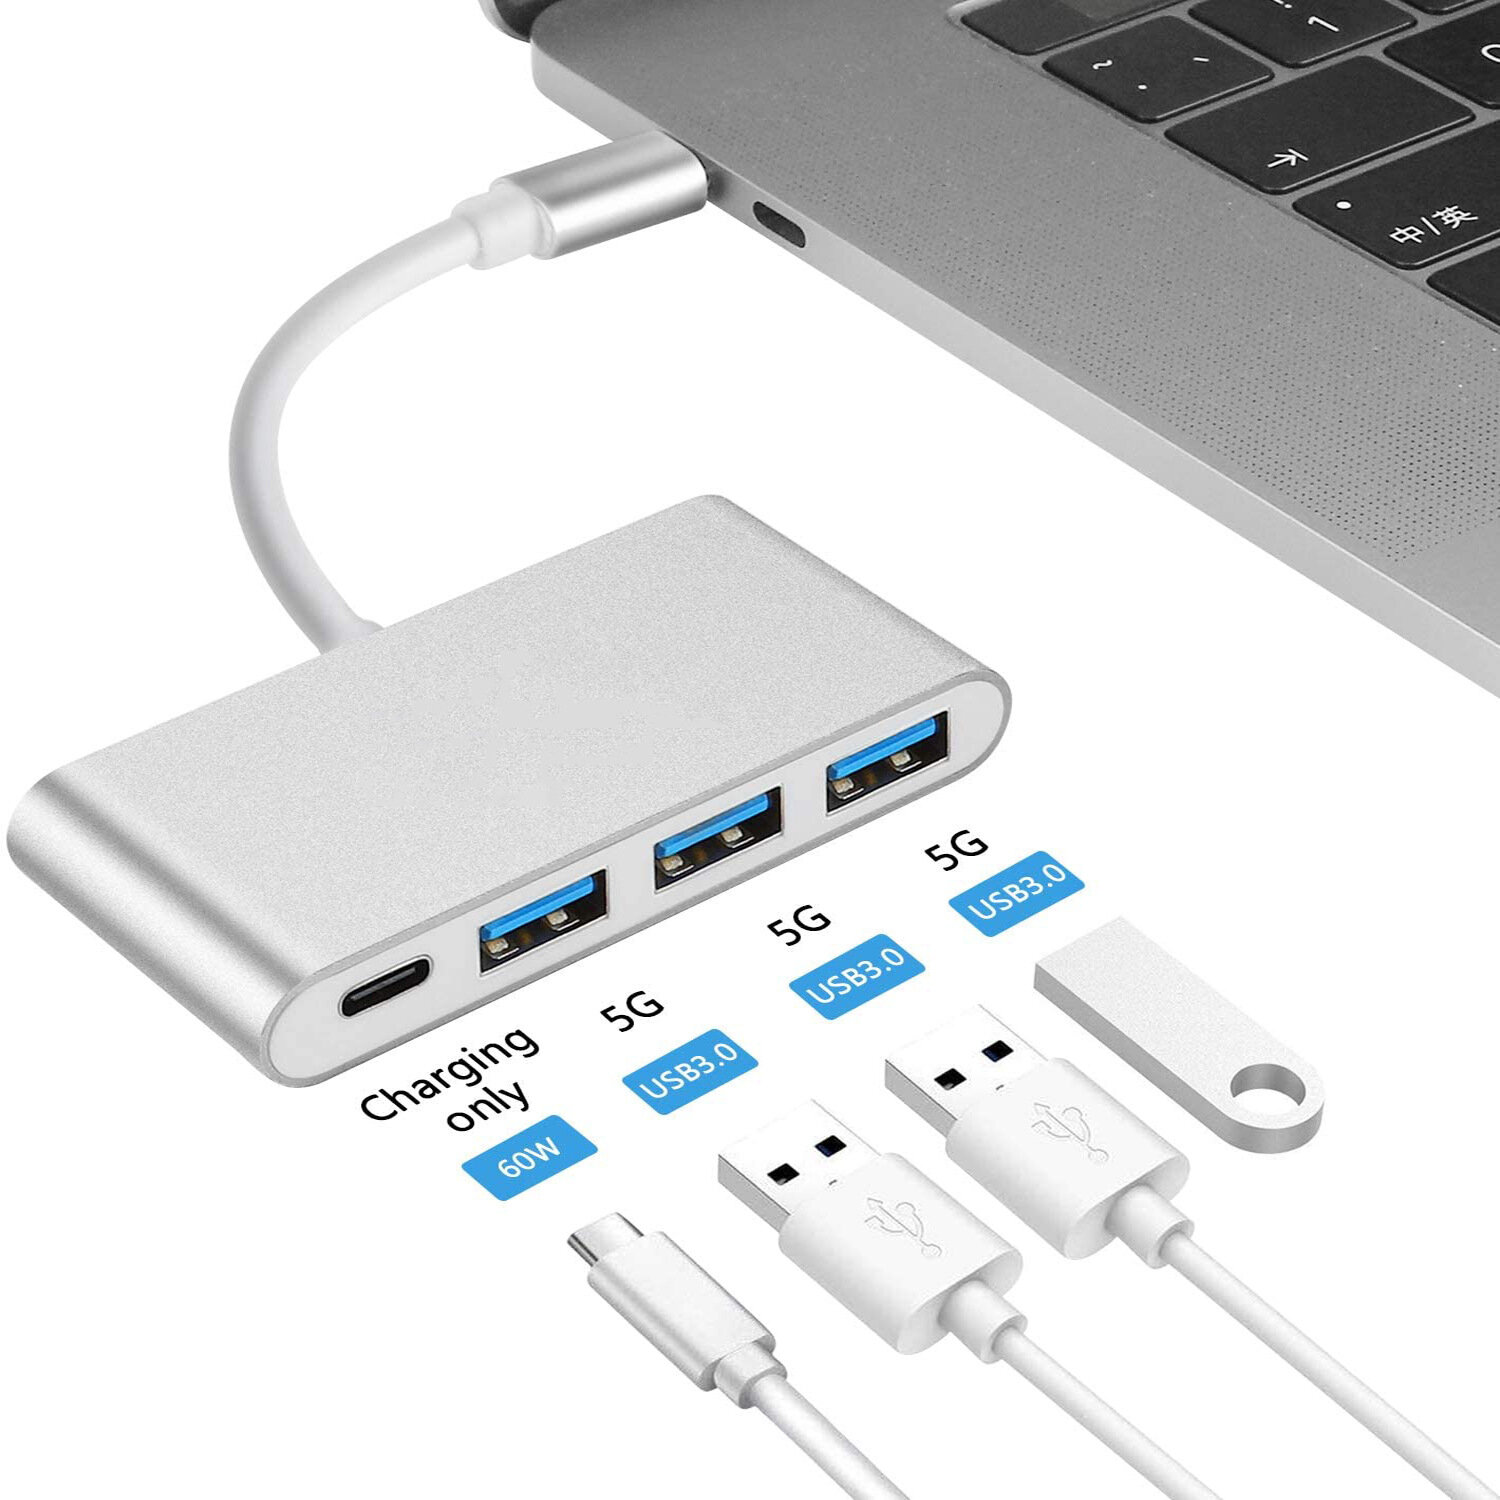 

Bakeey 4-in-1 USB-C HUB Docking Station Adapter OTG Convertor With USB-C PD Power Delivery / USB 3.0 *3 For iPhone 12 12